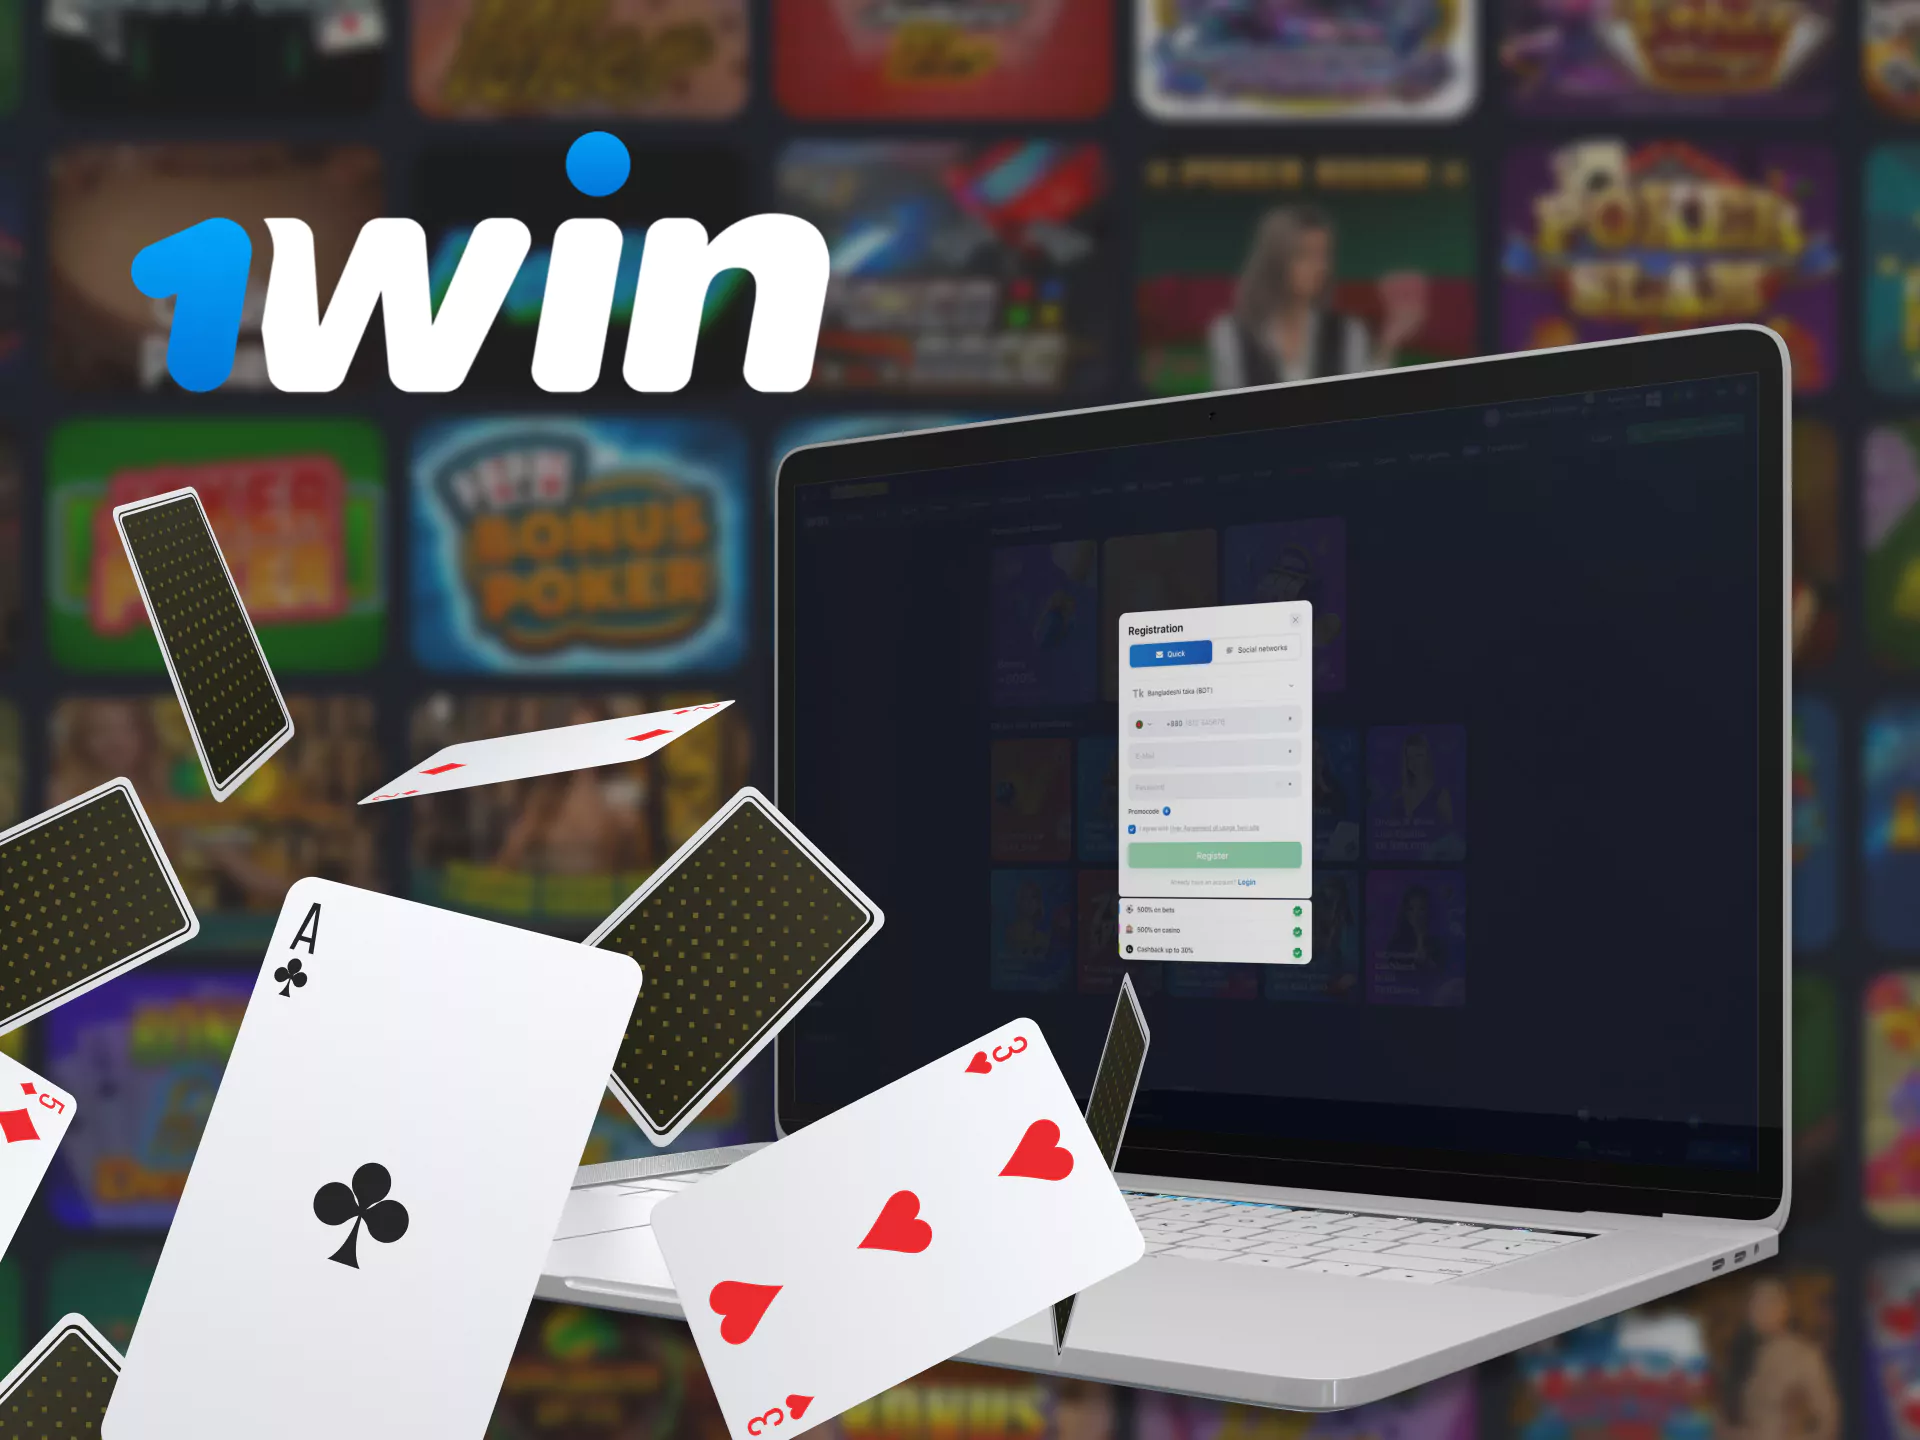 Find out how to start playing poker on 1Win easily and quickly.